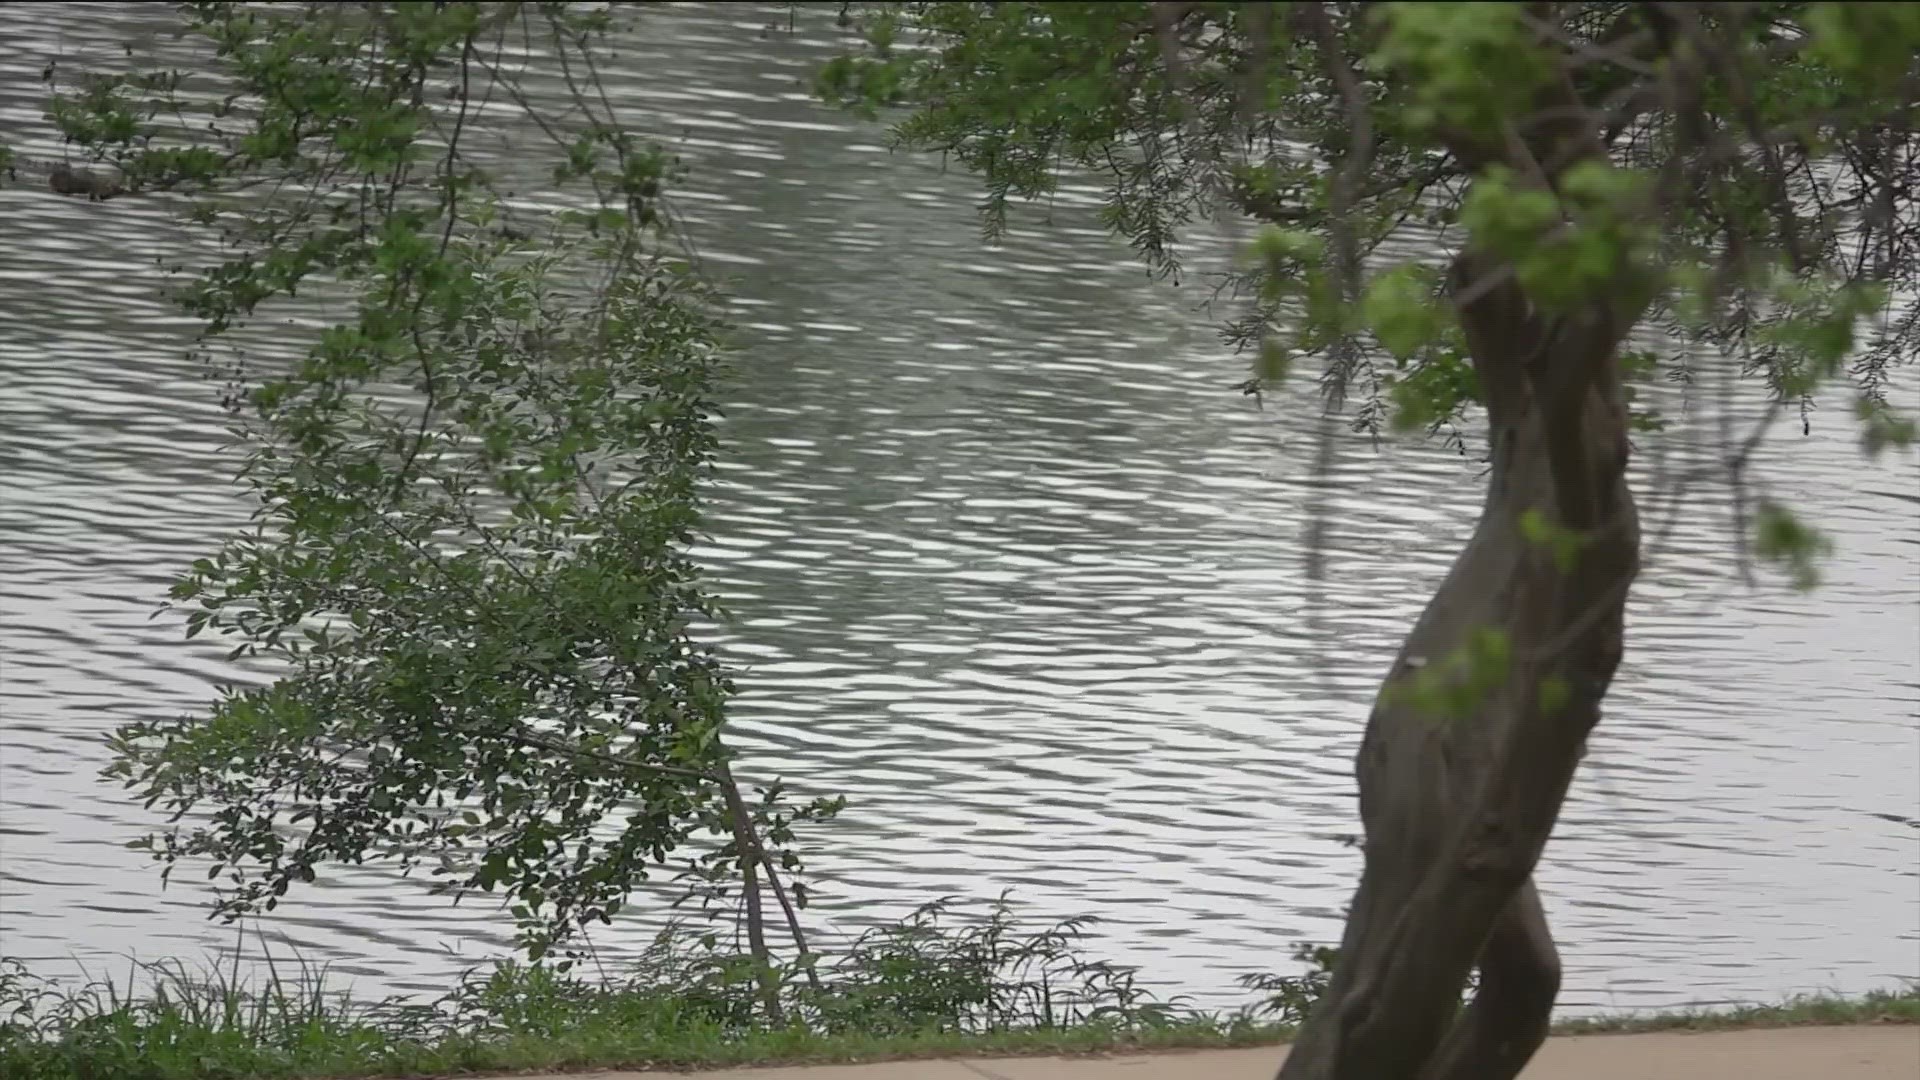 Within roughly a month, two bodies have been pulled from the lake. Now, City leaders are detailing what can be done to increase safety.